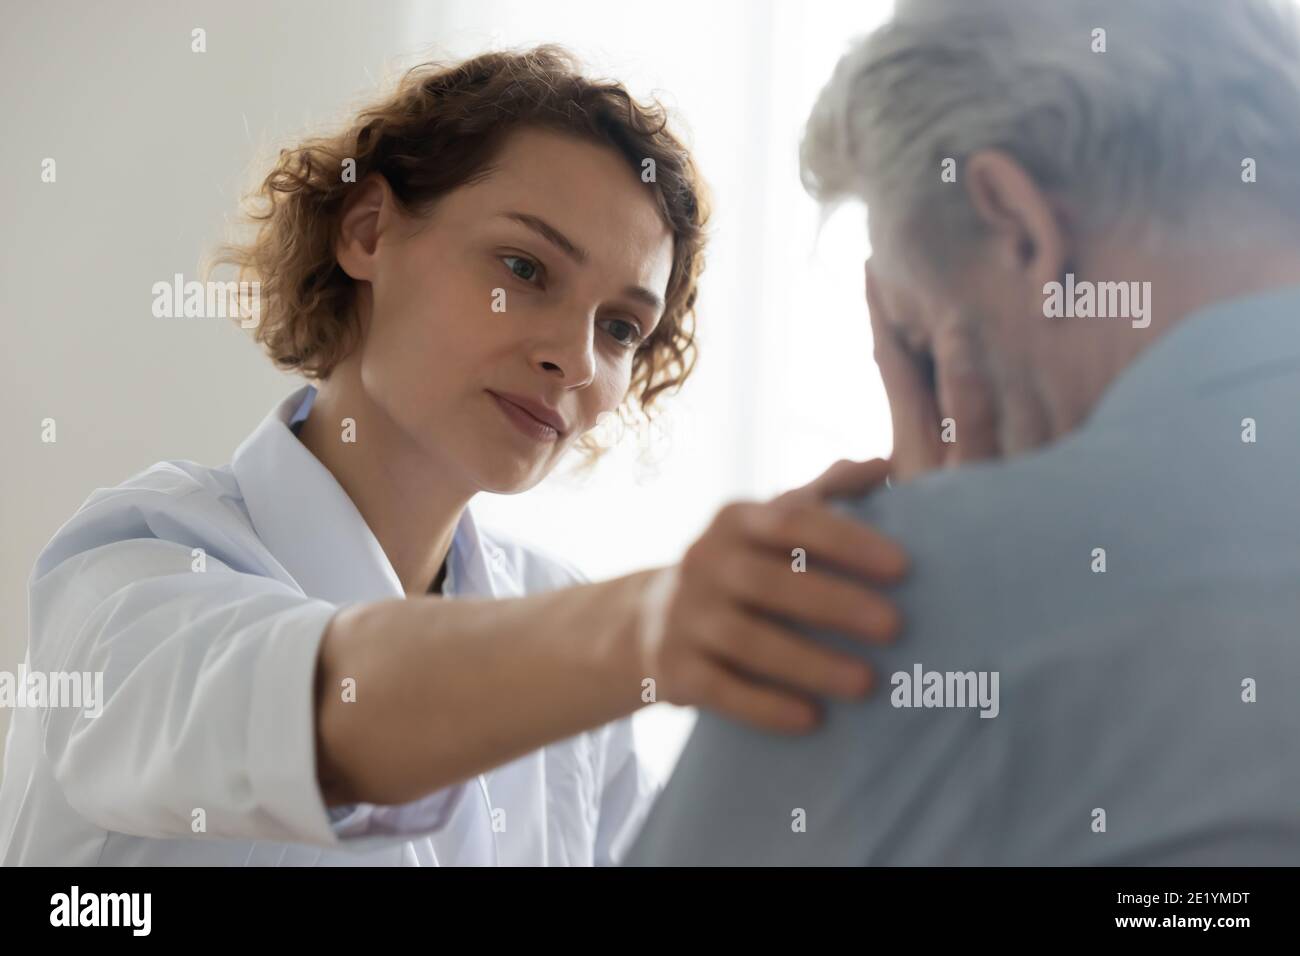 Compassionate young general practitioner doctor supporting desperate man. Stock Photo